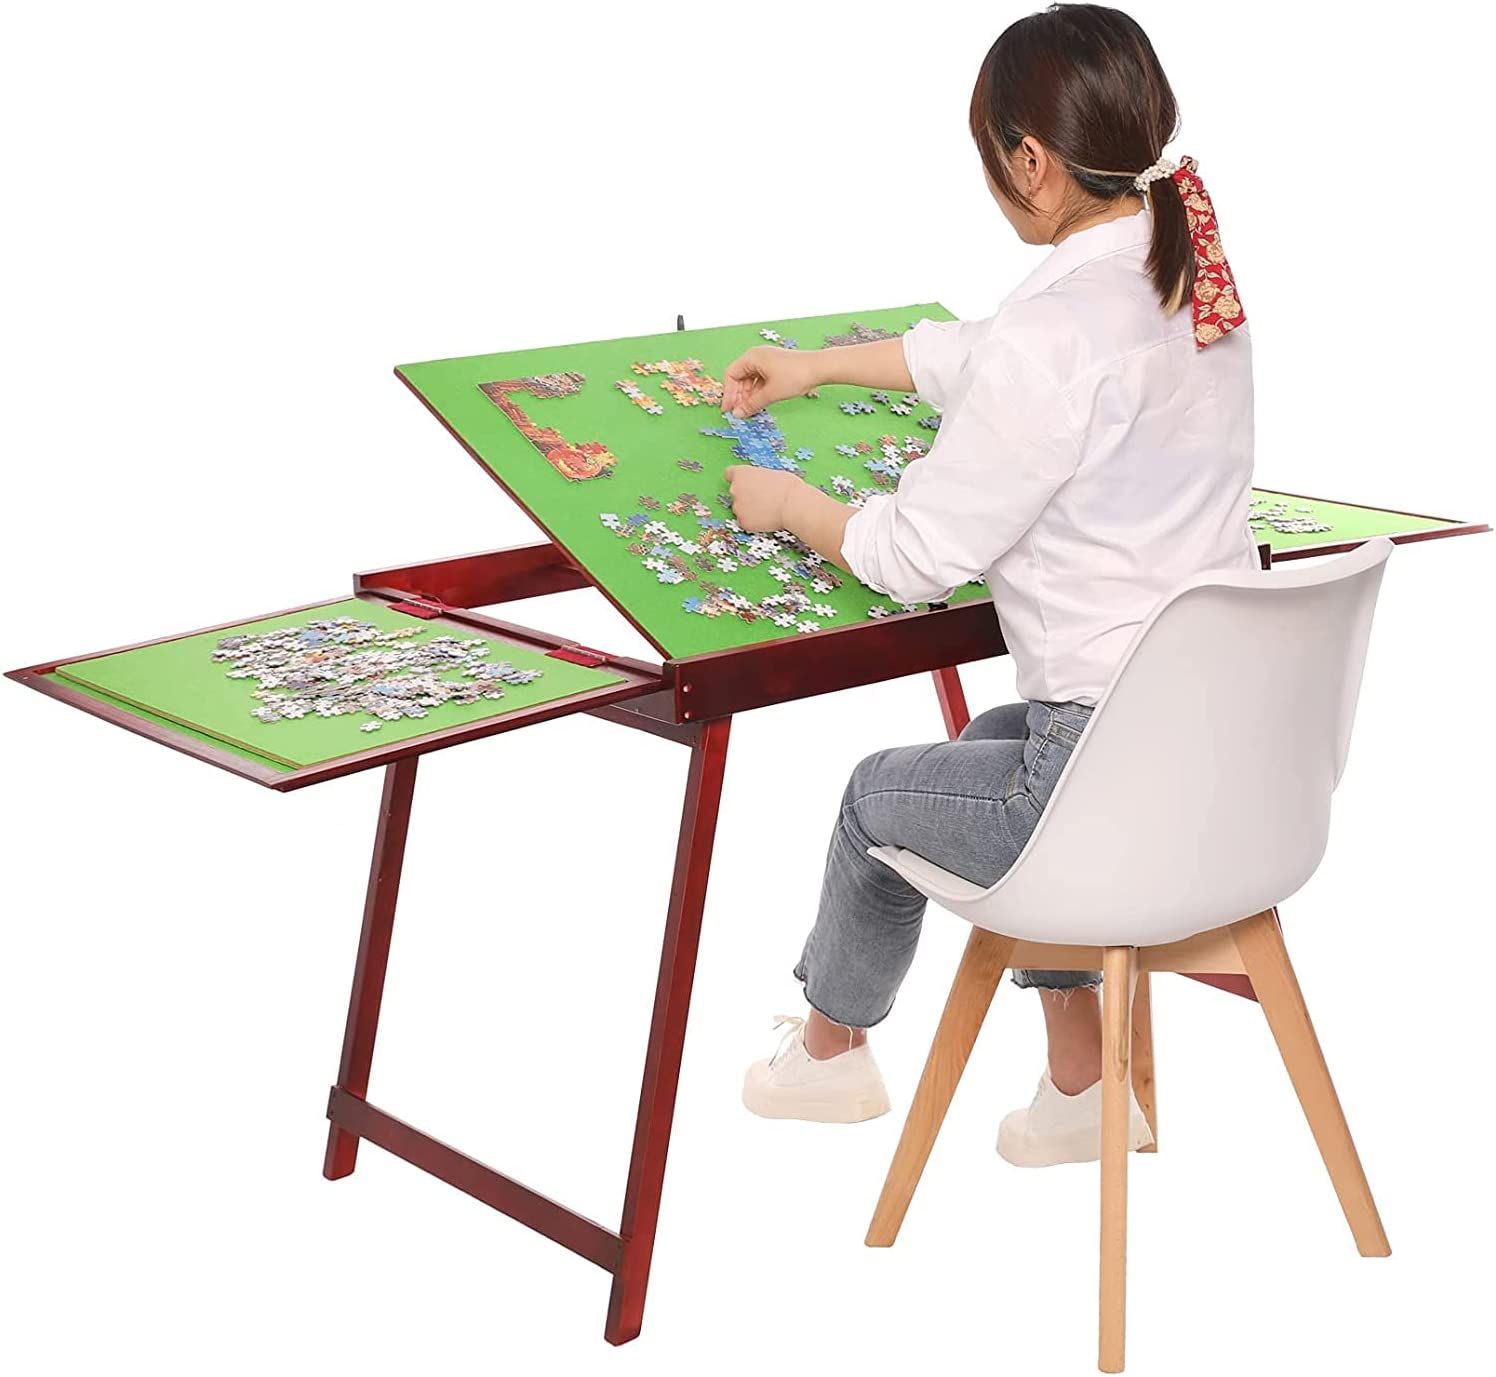 Fold-And-Go Foldable Wooden Jigsaw Table: A Must Have Puzzle Table